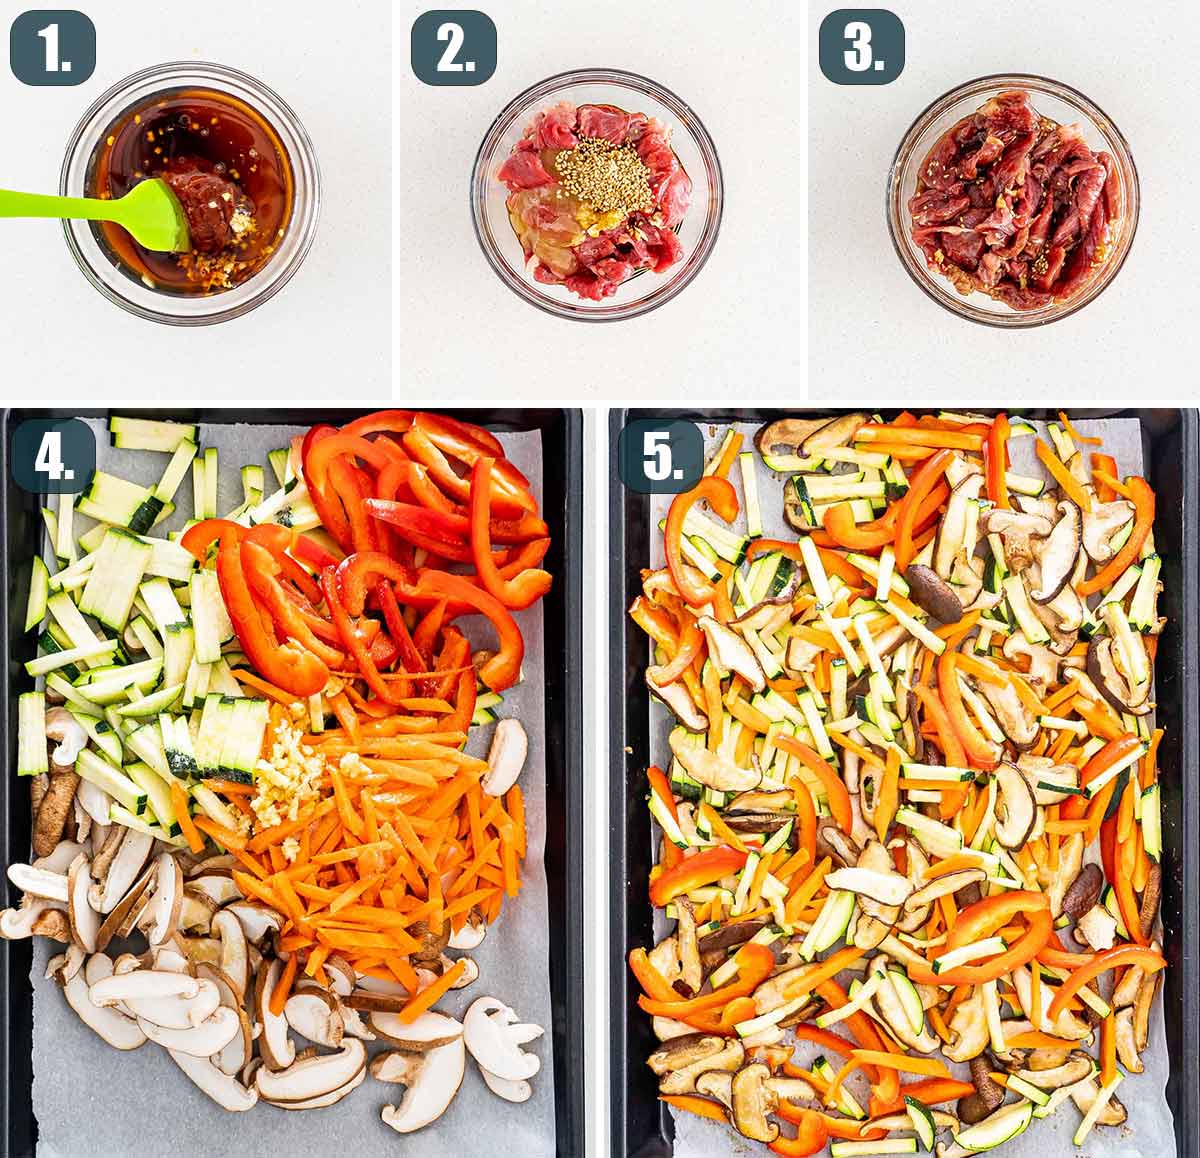 process shots showing how to cook vegetables and marinate beef for bibimbap.